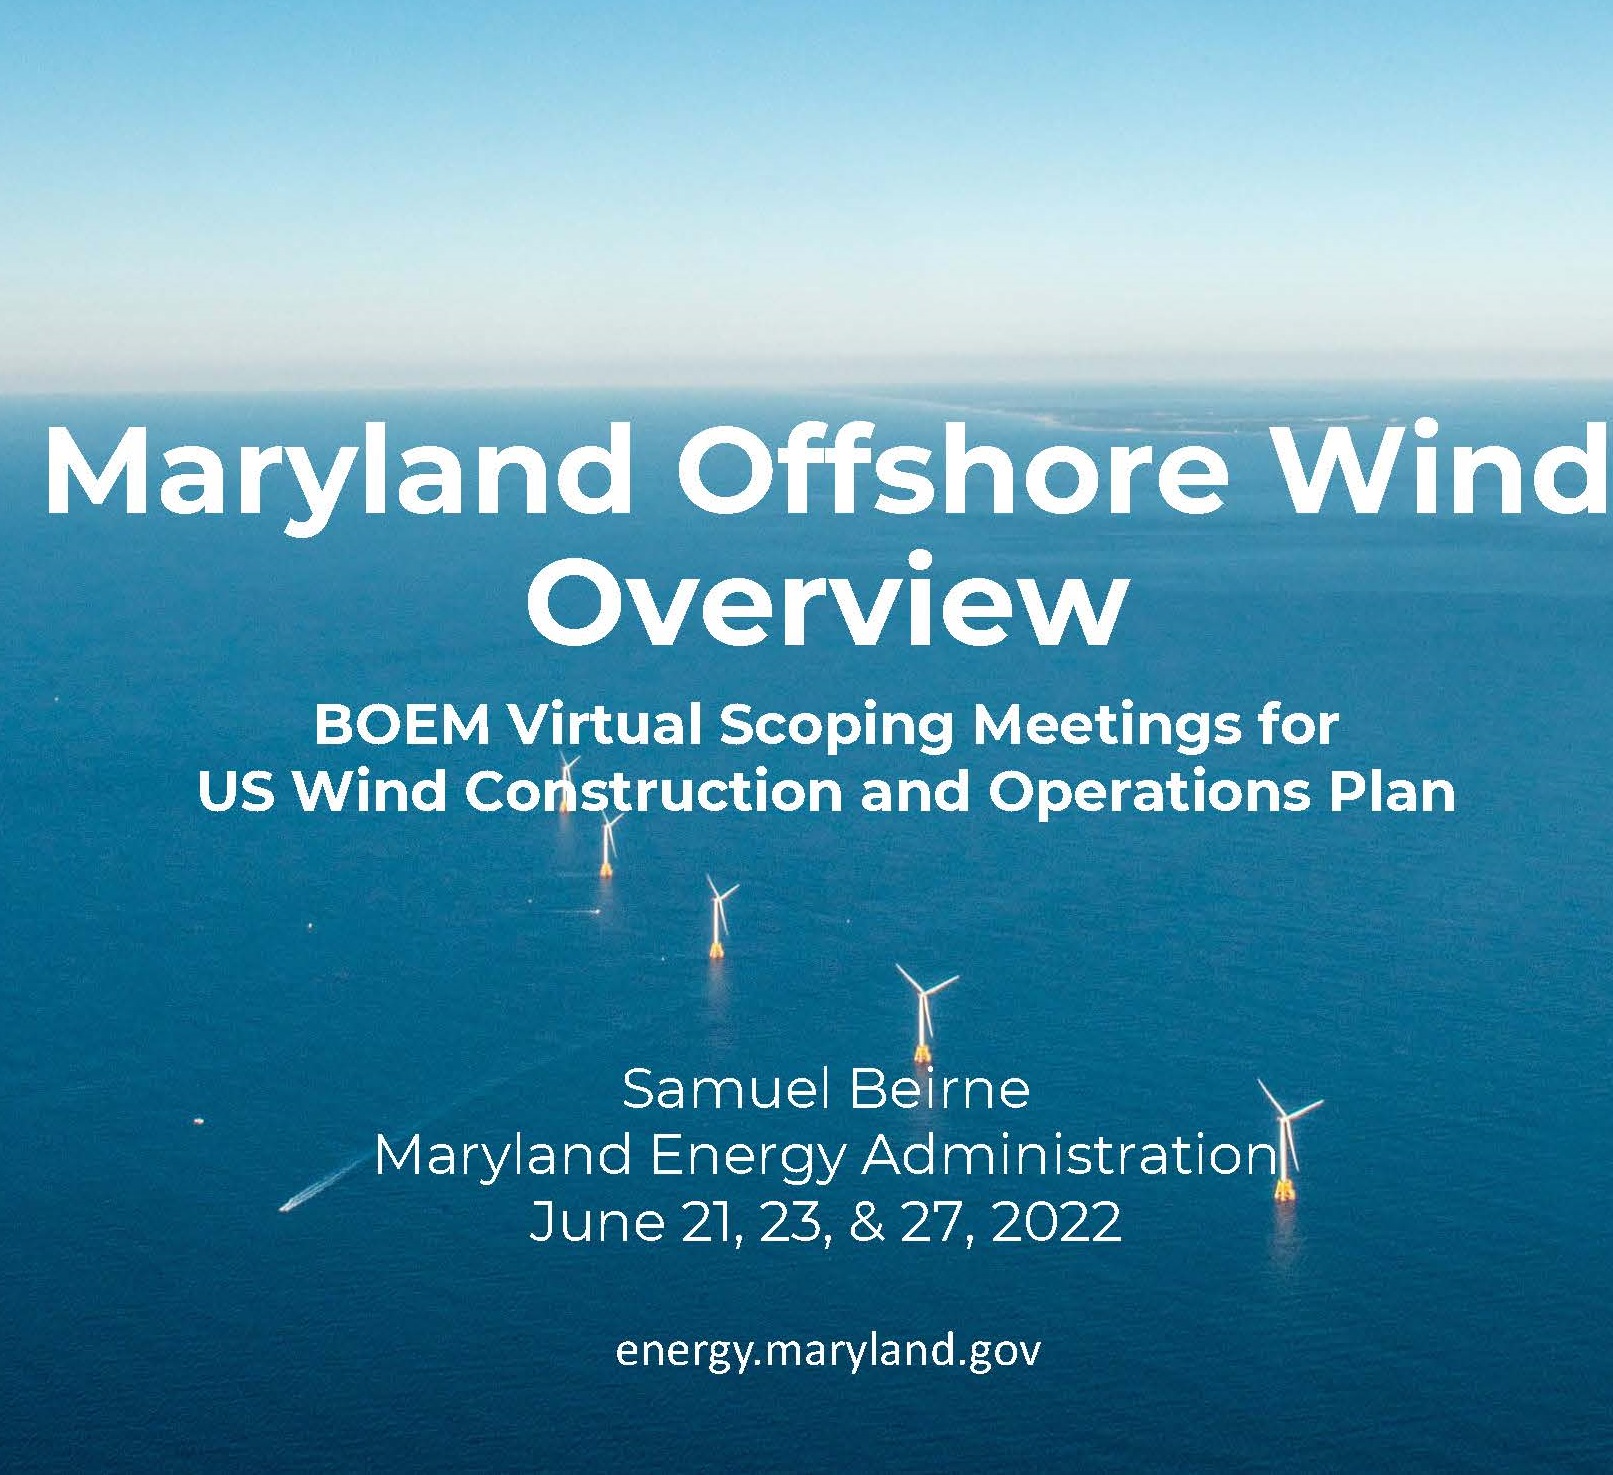 Offshore Wind Overview